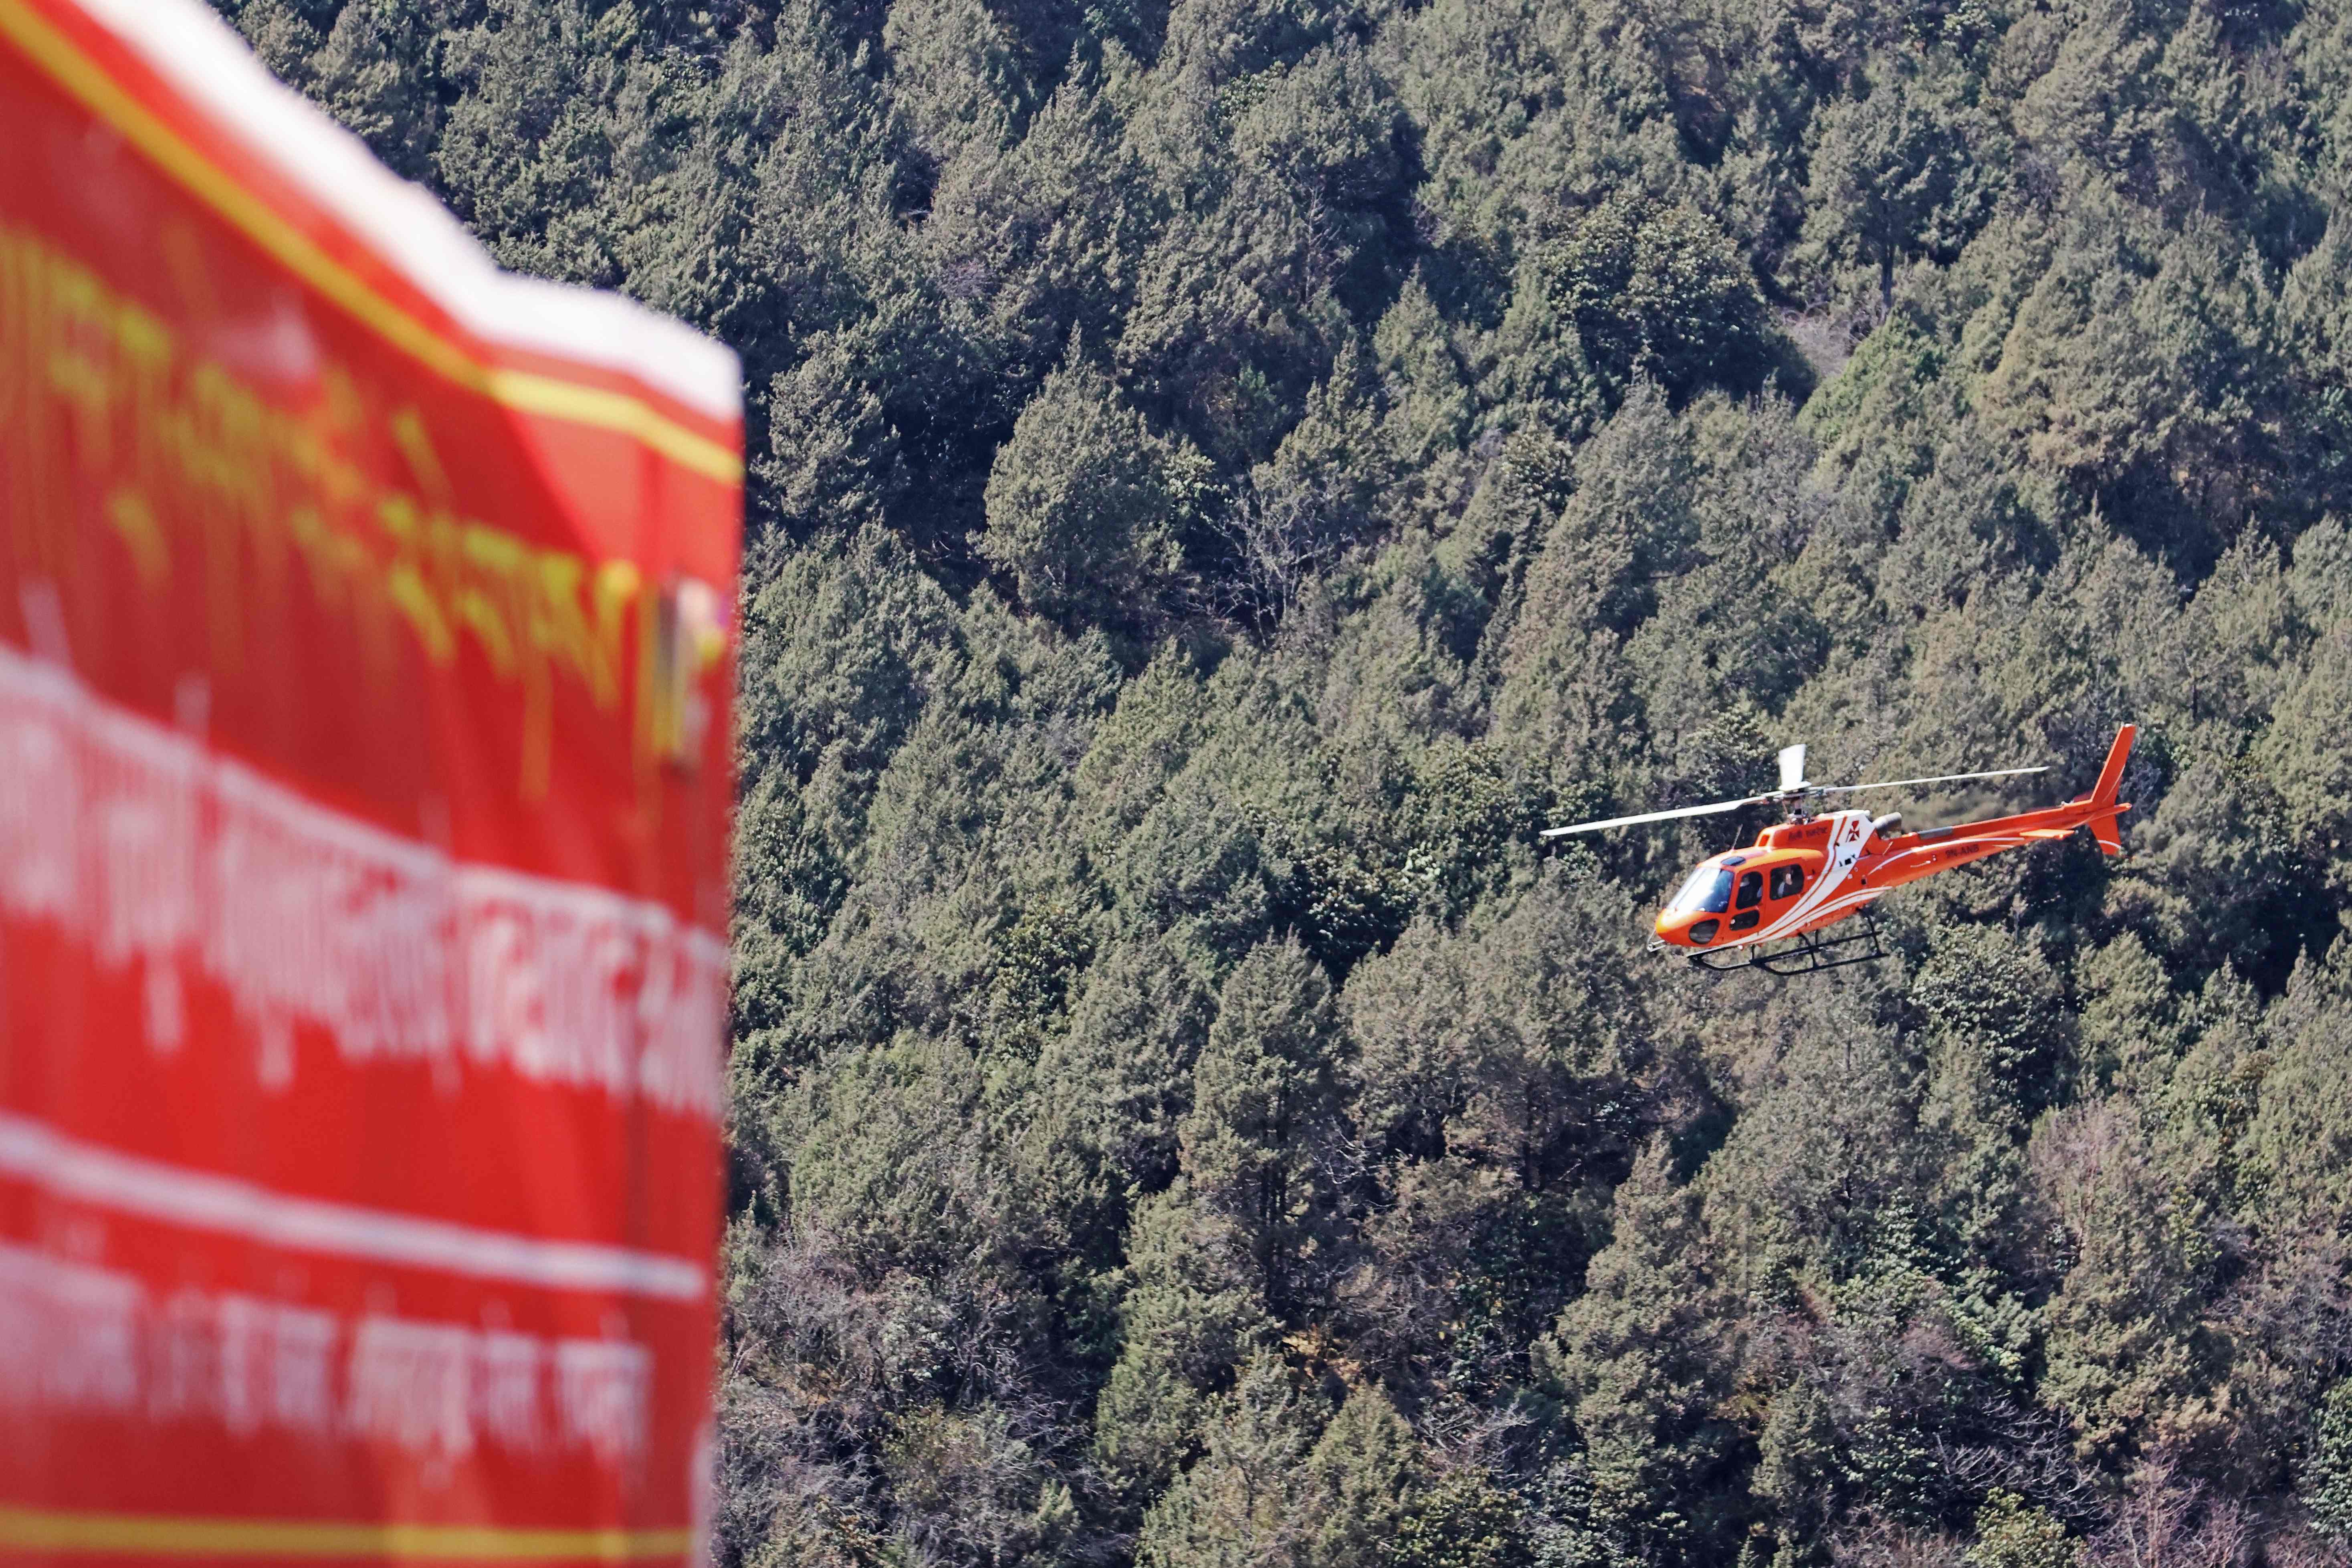 A file image shows a rescue helicopter flying in Olangchung Gola in Nepal